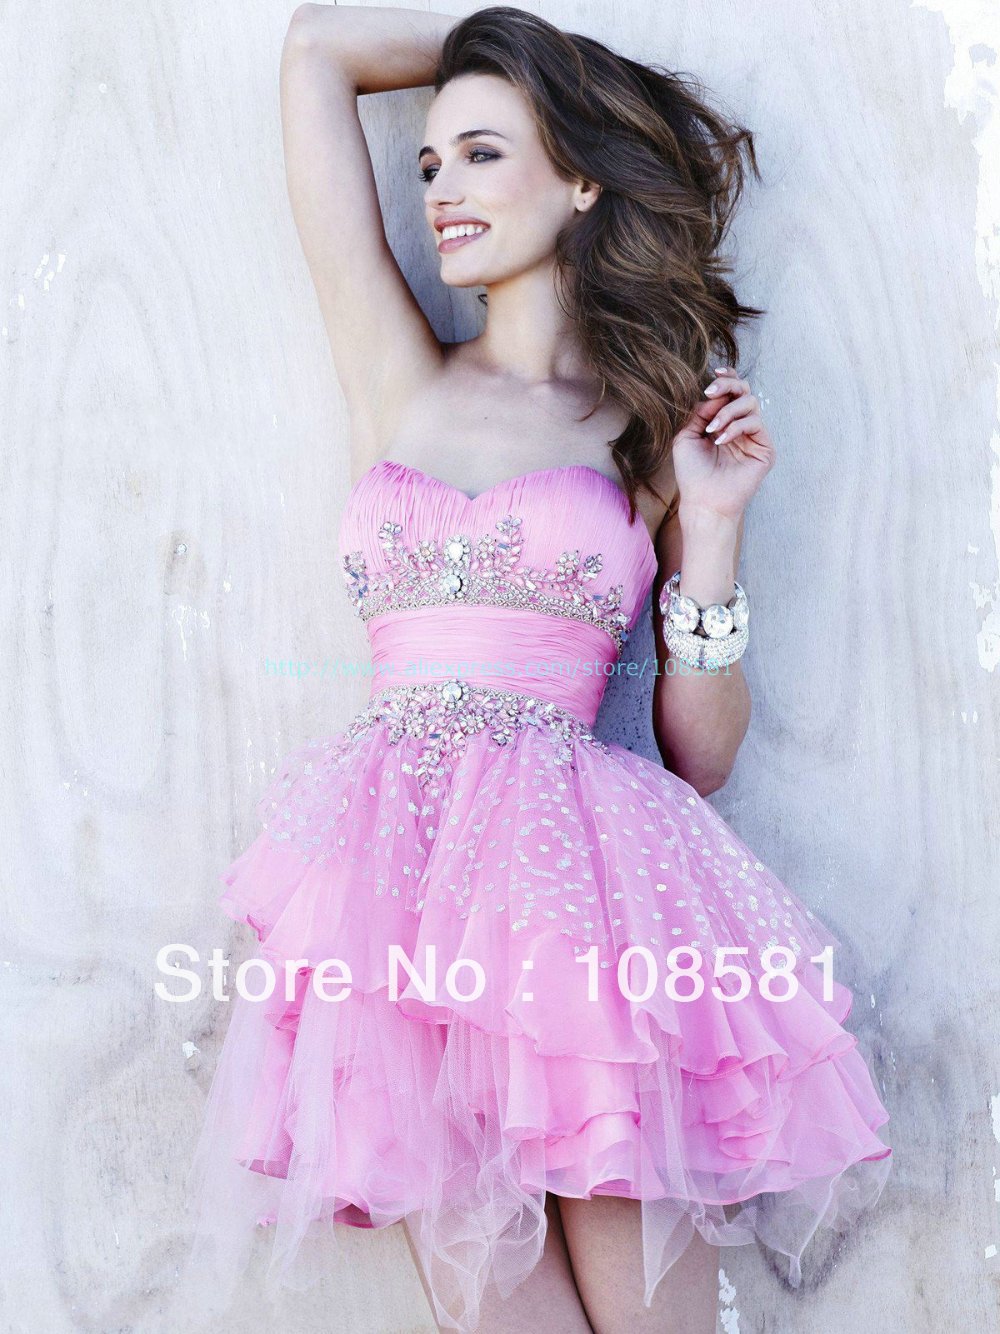 Best Selling 2013 Short Sweetheart Hot Pink Tulle & Chiffon A-line Beaded & Crystals Ruffles Cocktail Dress